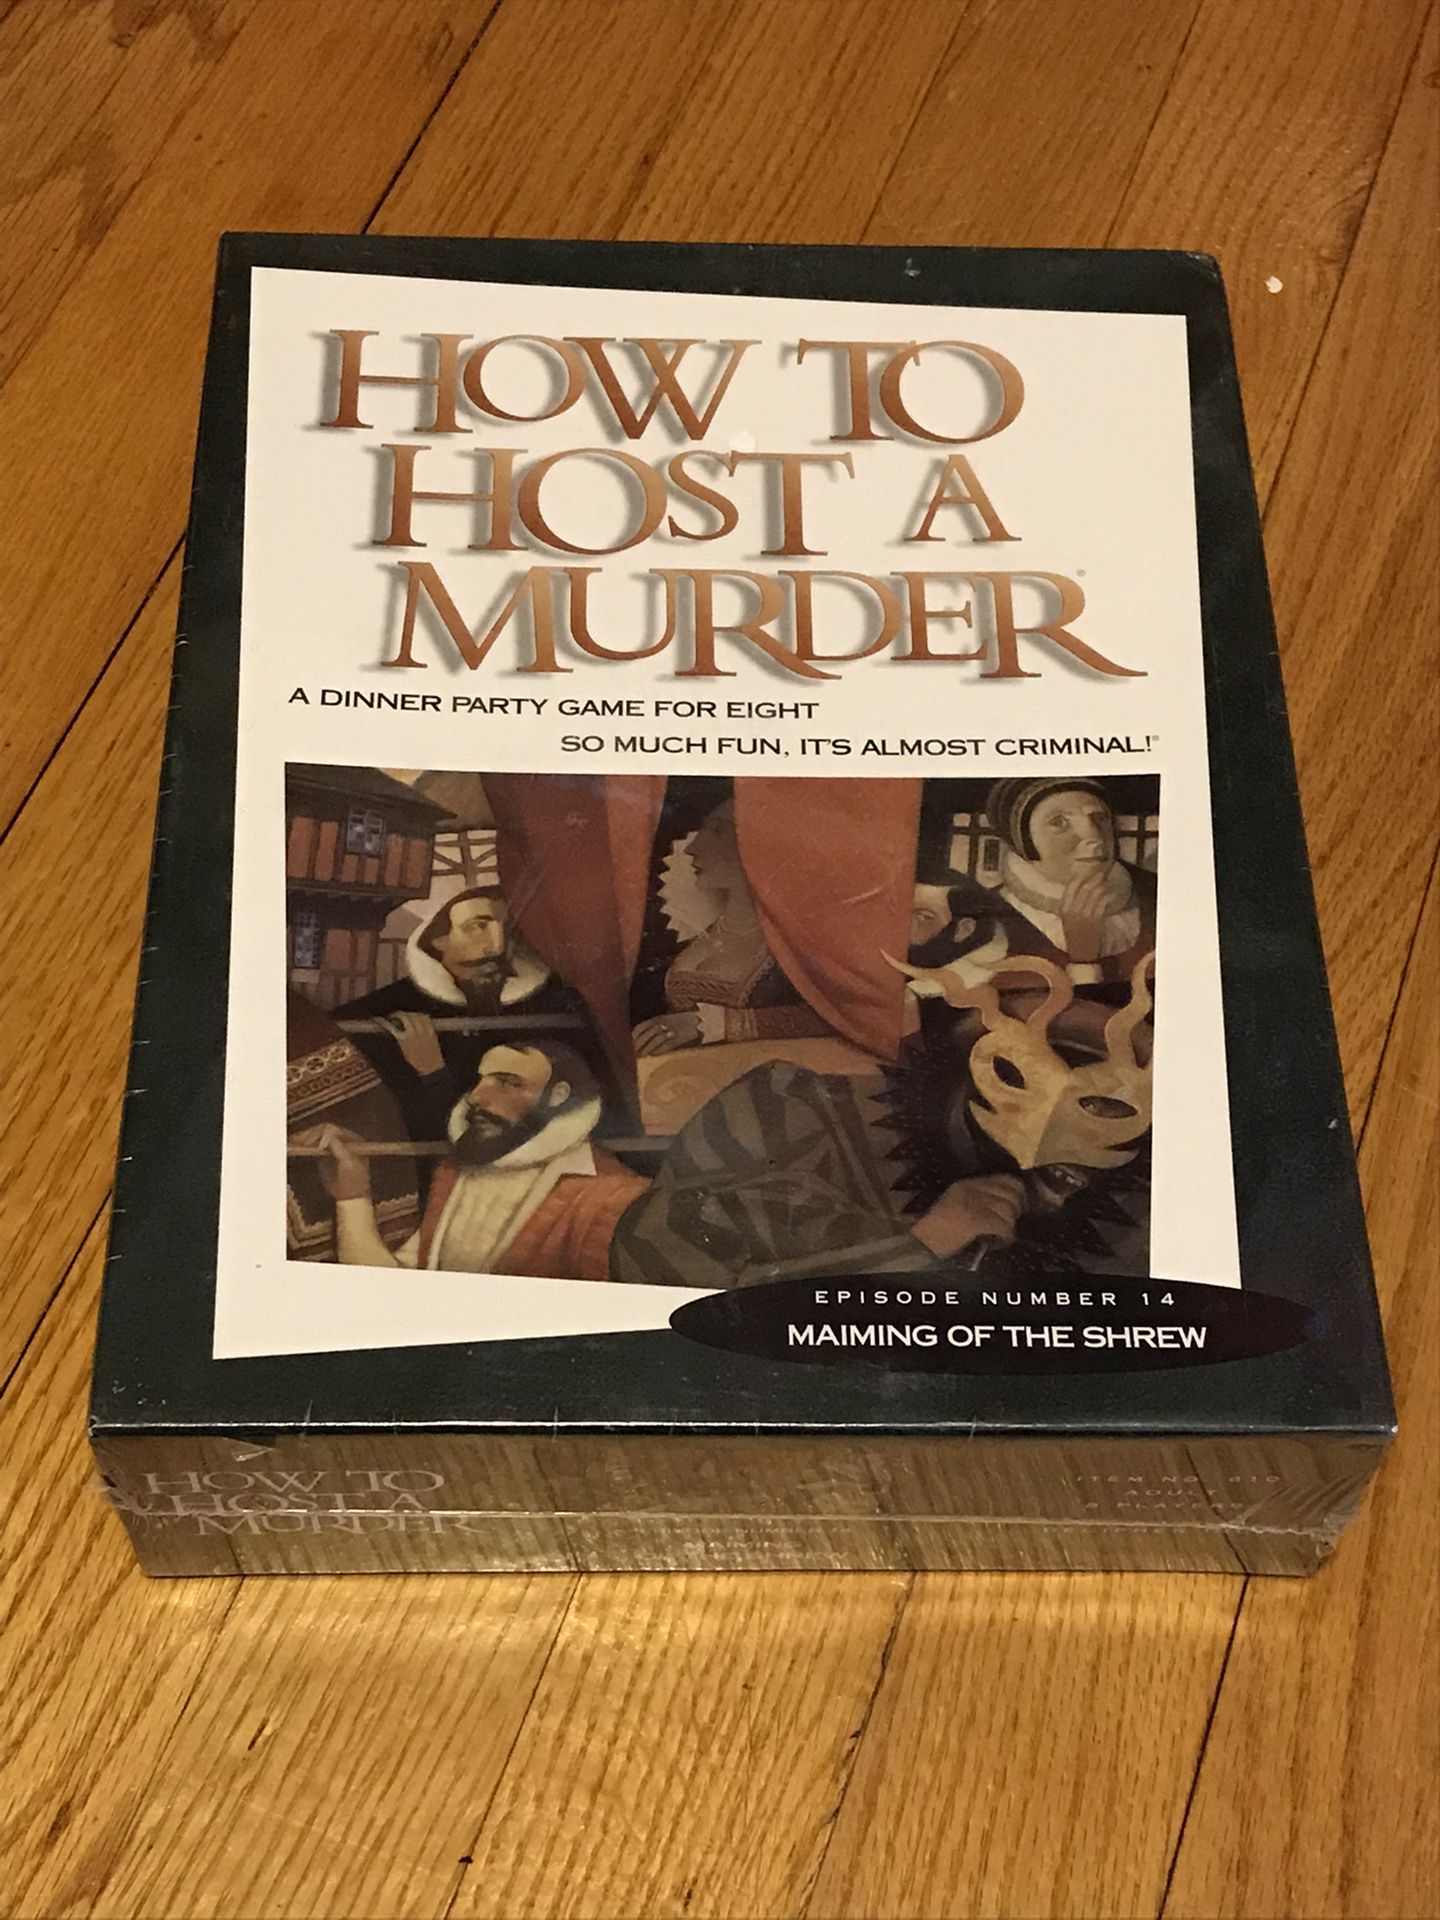 How To Host A Murder. Episode #14. "Maiming Of The Shrew." Sealed. NEW.